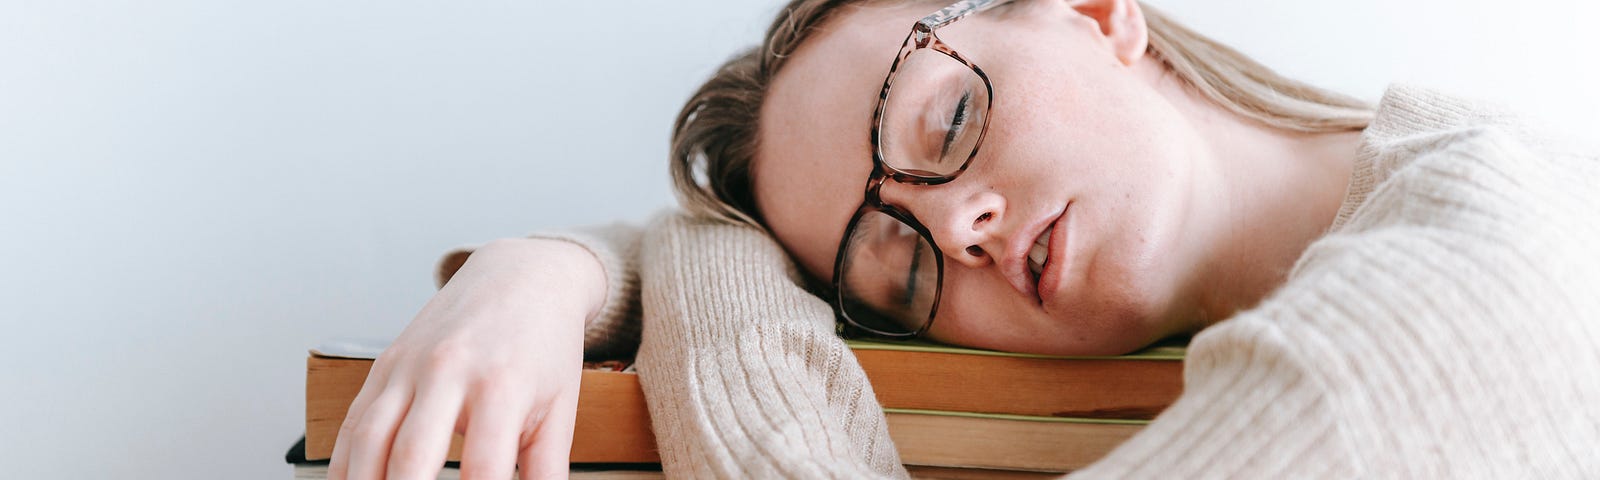 A girl sleeping, resting her head on books.